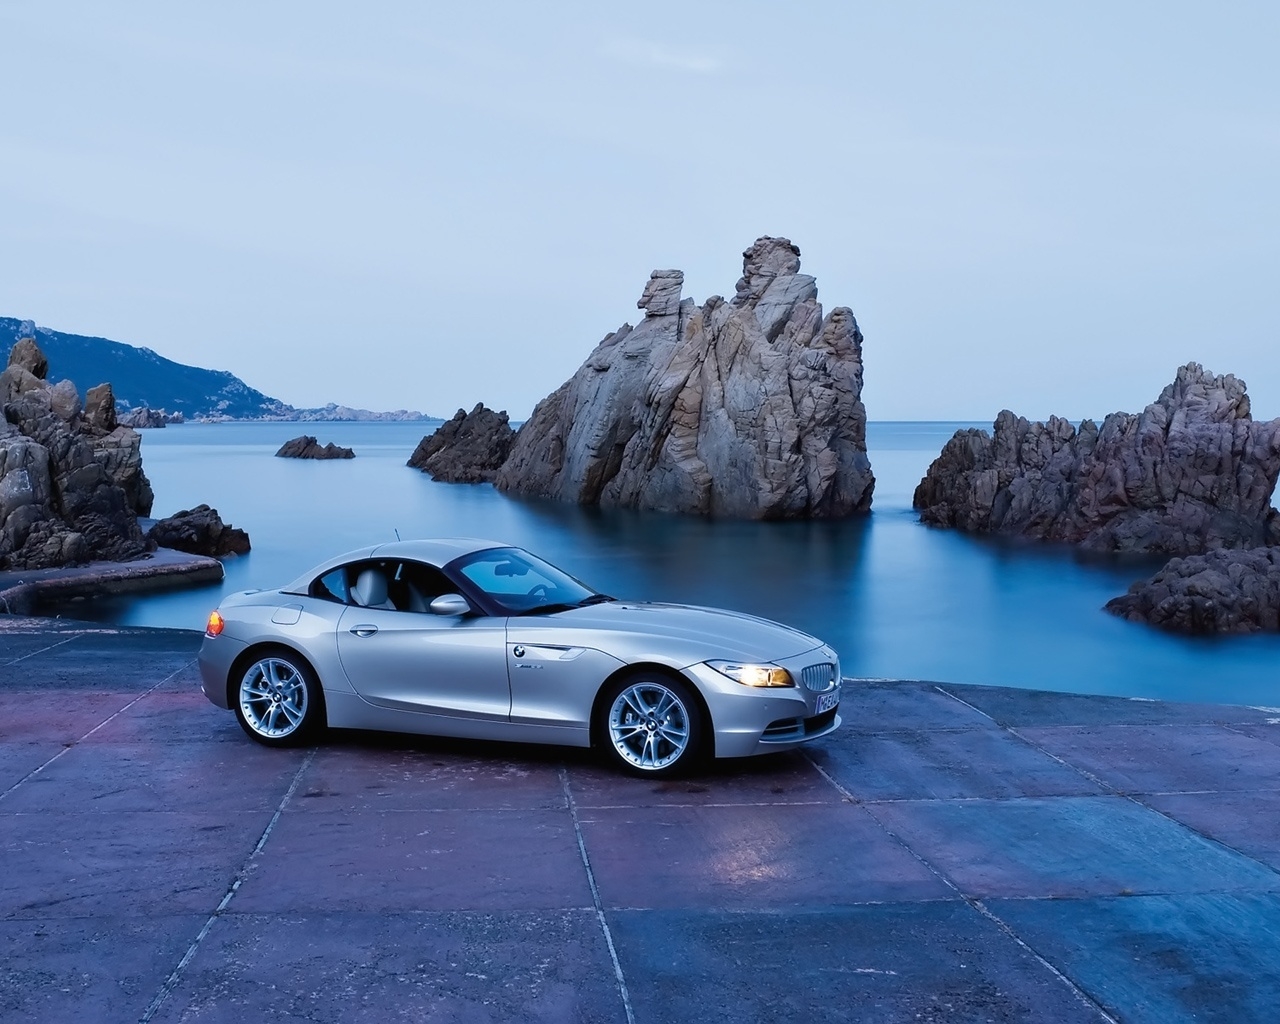 BMW Z4 Roadster Seashore 2009 for 1280 x 1024 resolution